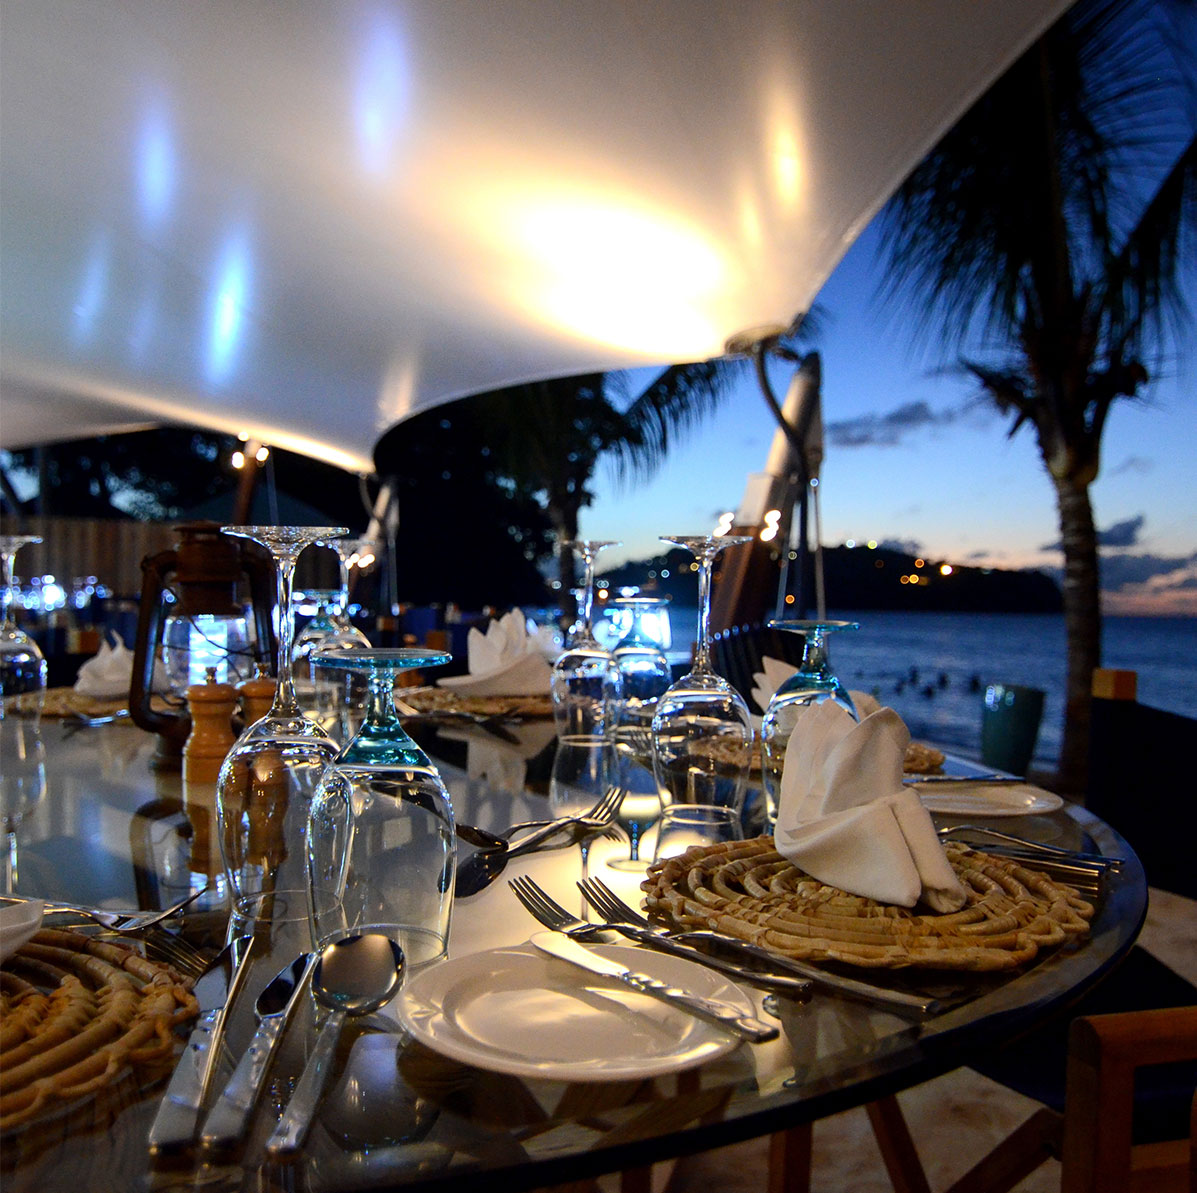 Beach club tables adorned with glassware, cutlery and napiery